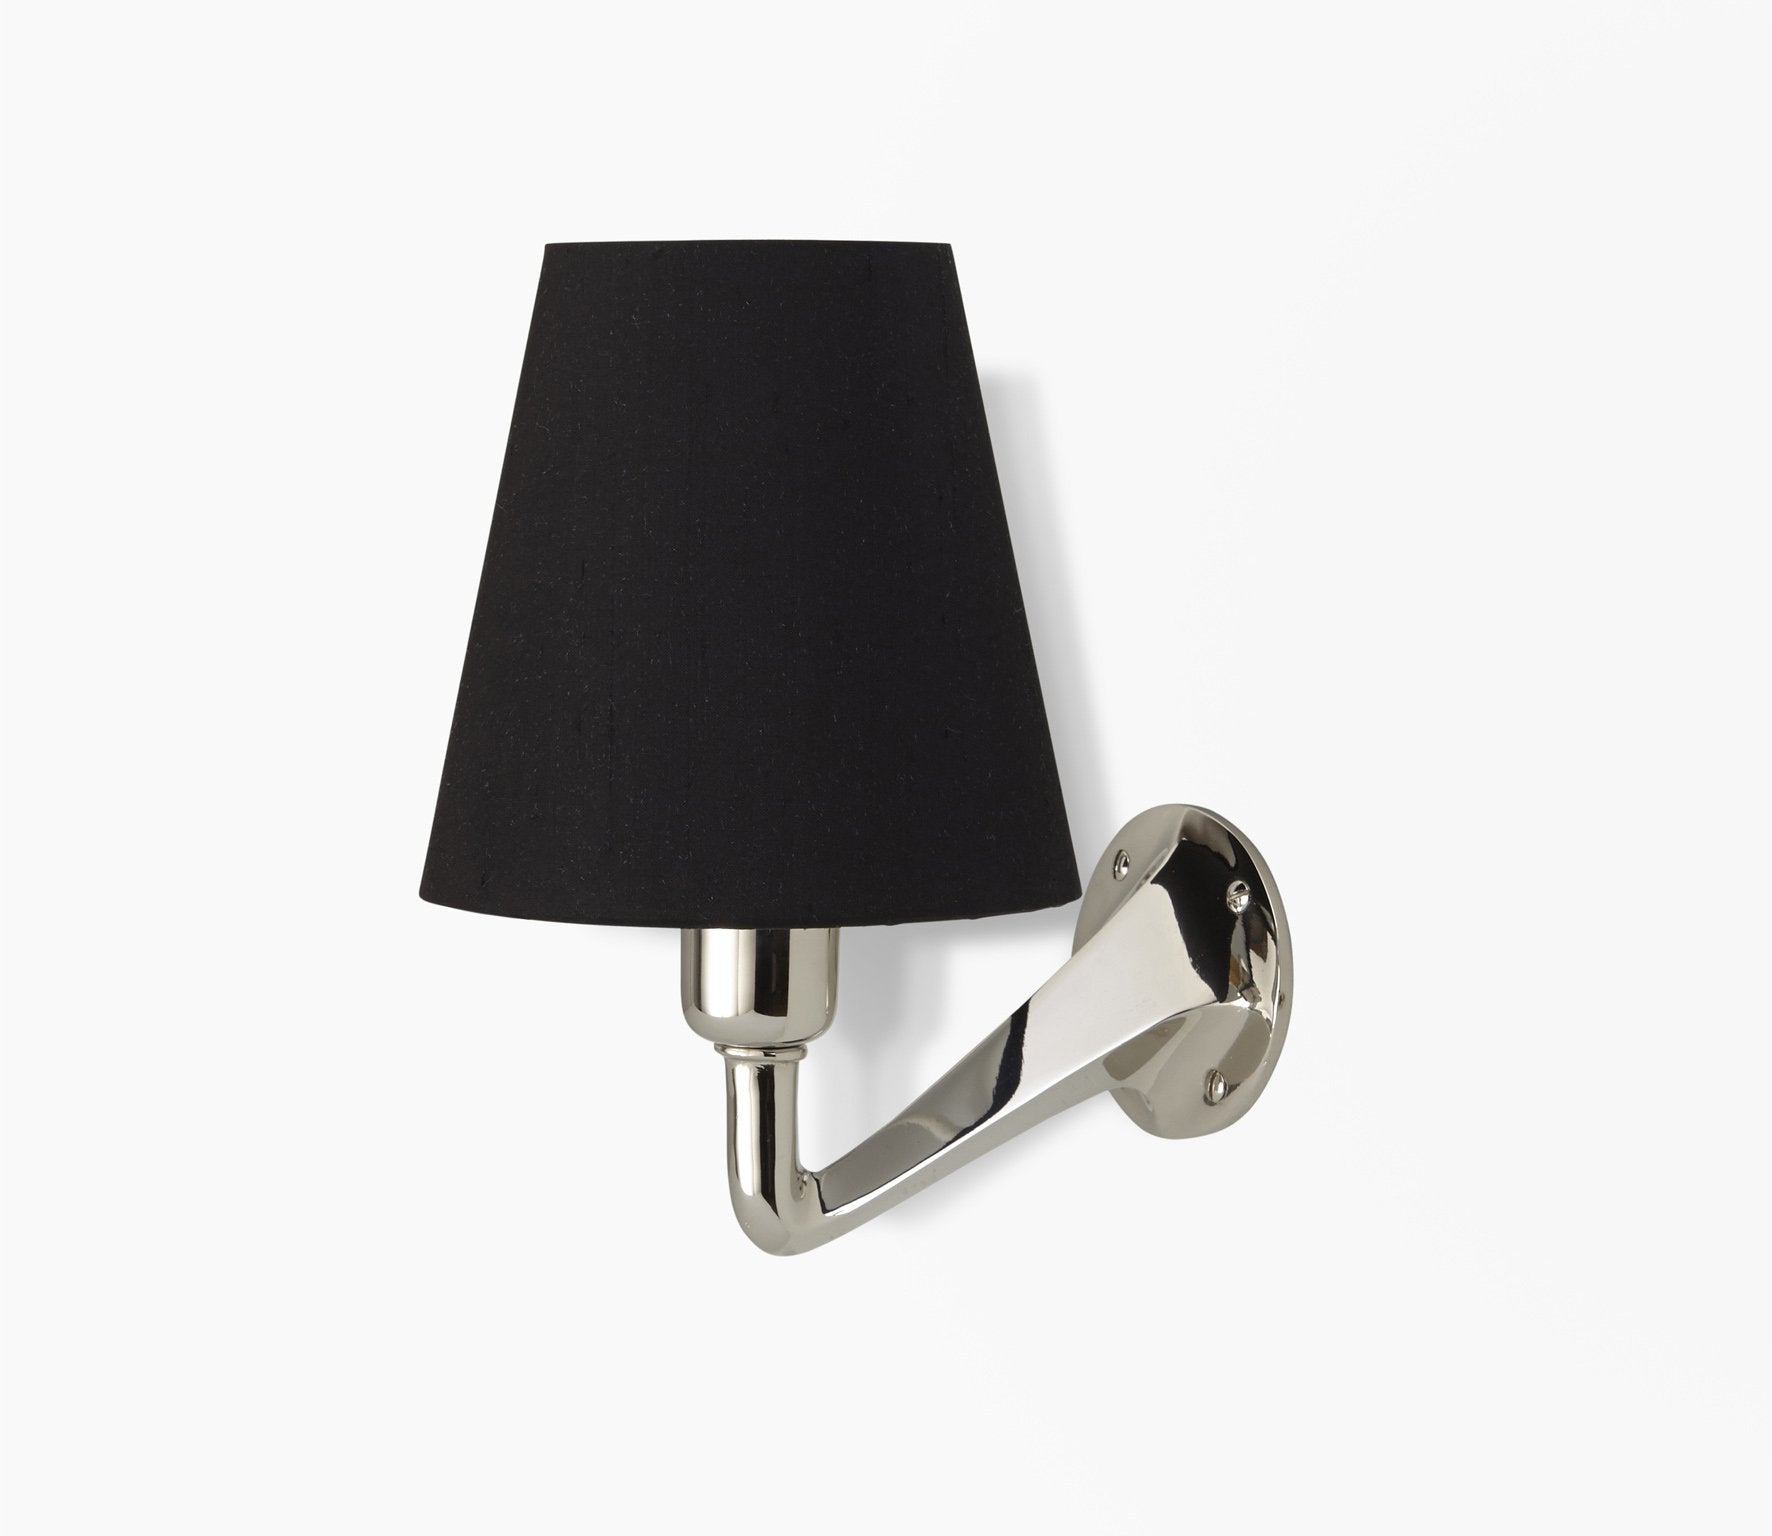 Leila Wall Light with Plain Empire Shade Product Image 4